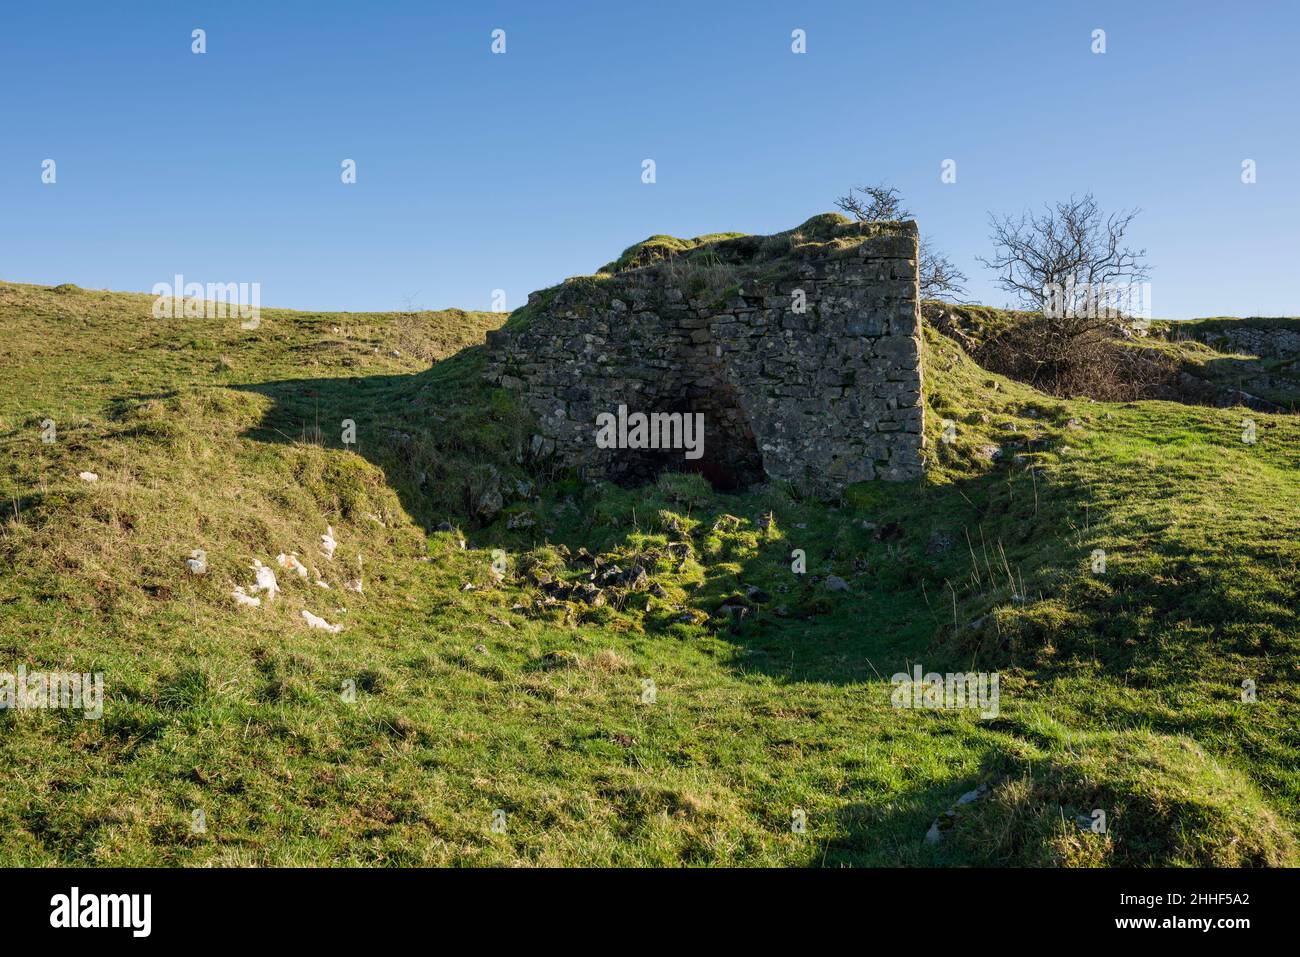 A lime kiln at Draycott Sleights Nature Reserve in the Mendip Hills, Somerset, England. Stock Photo